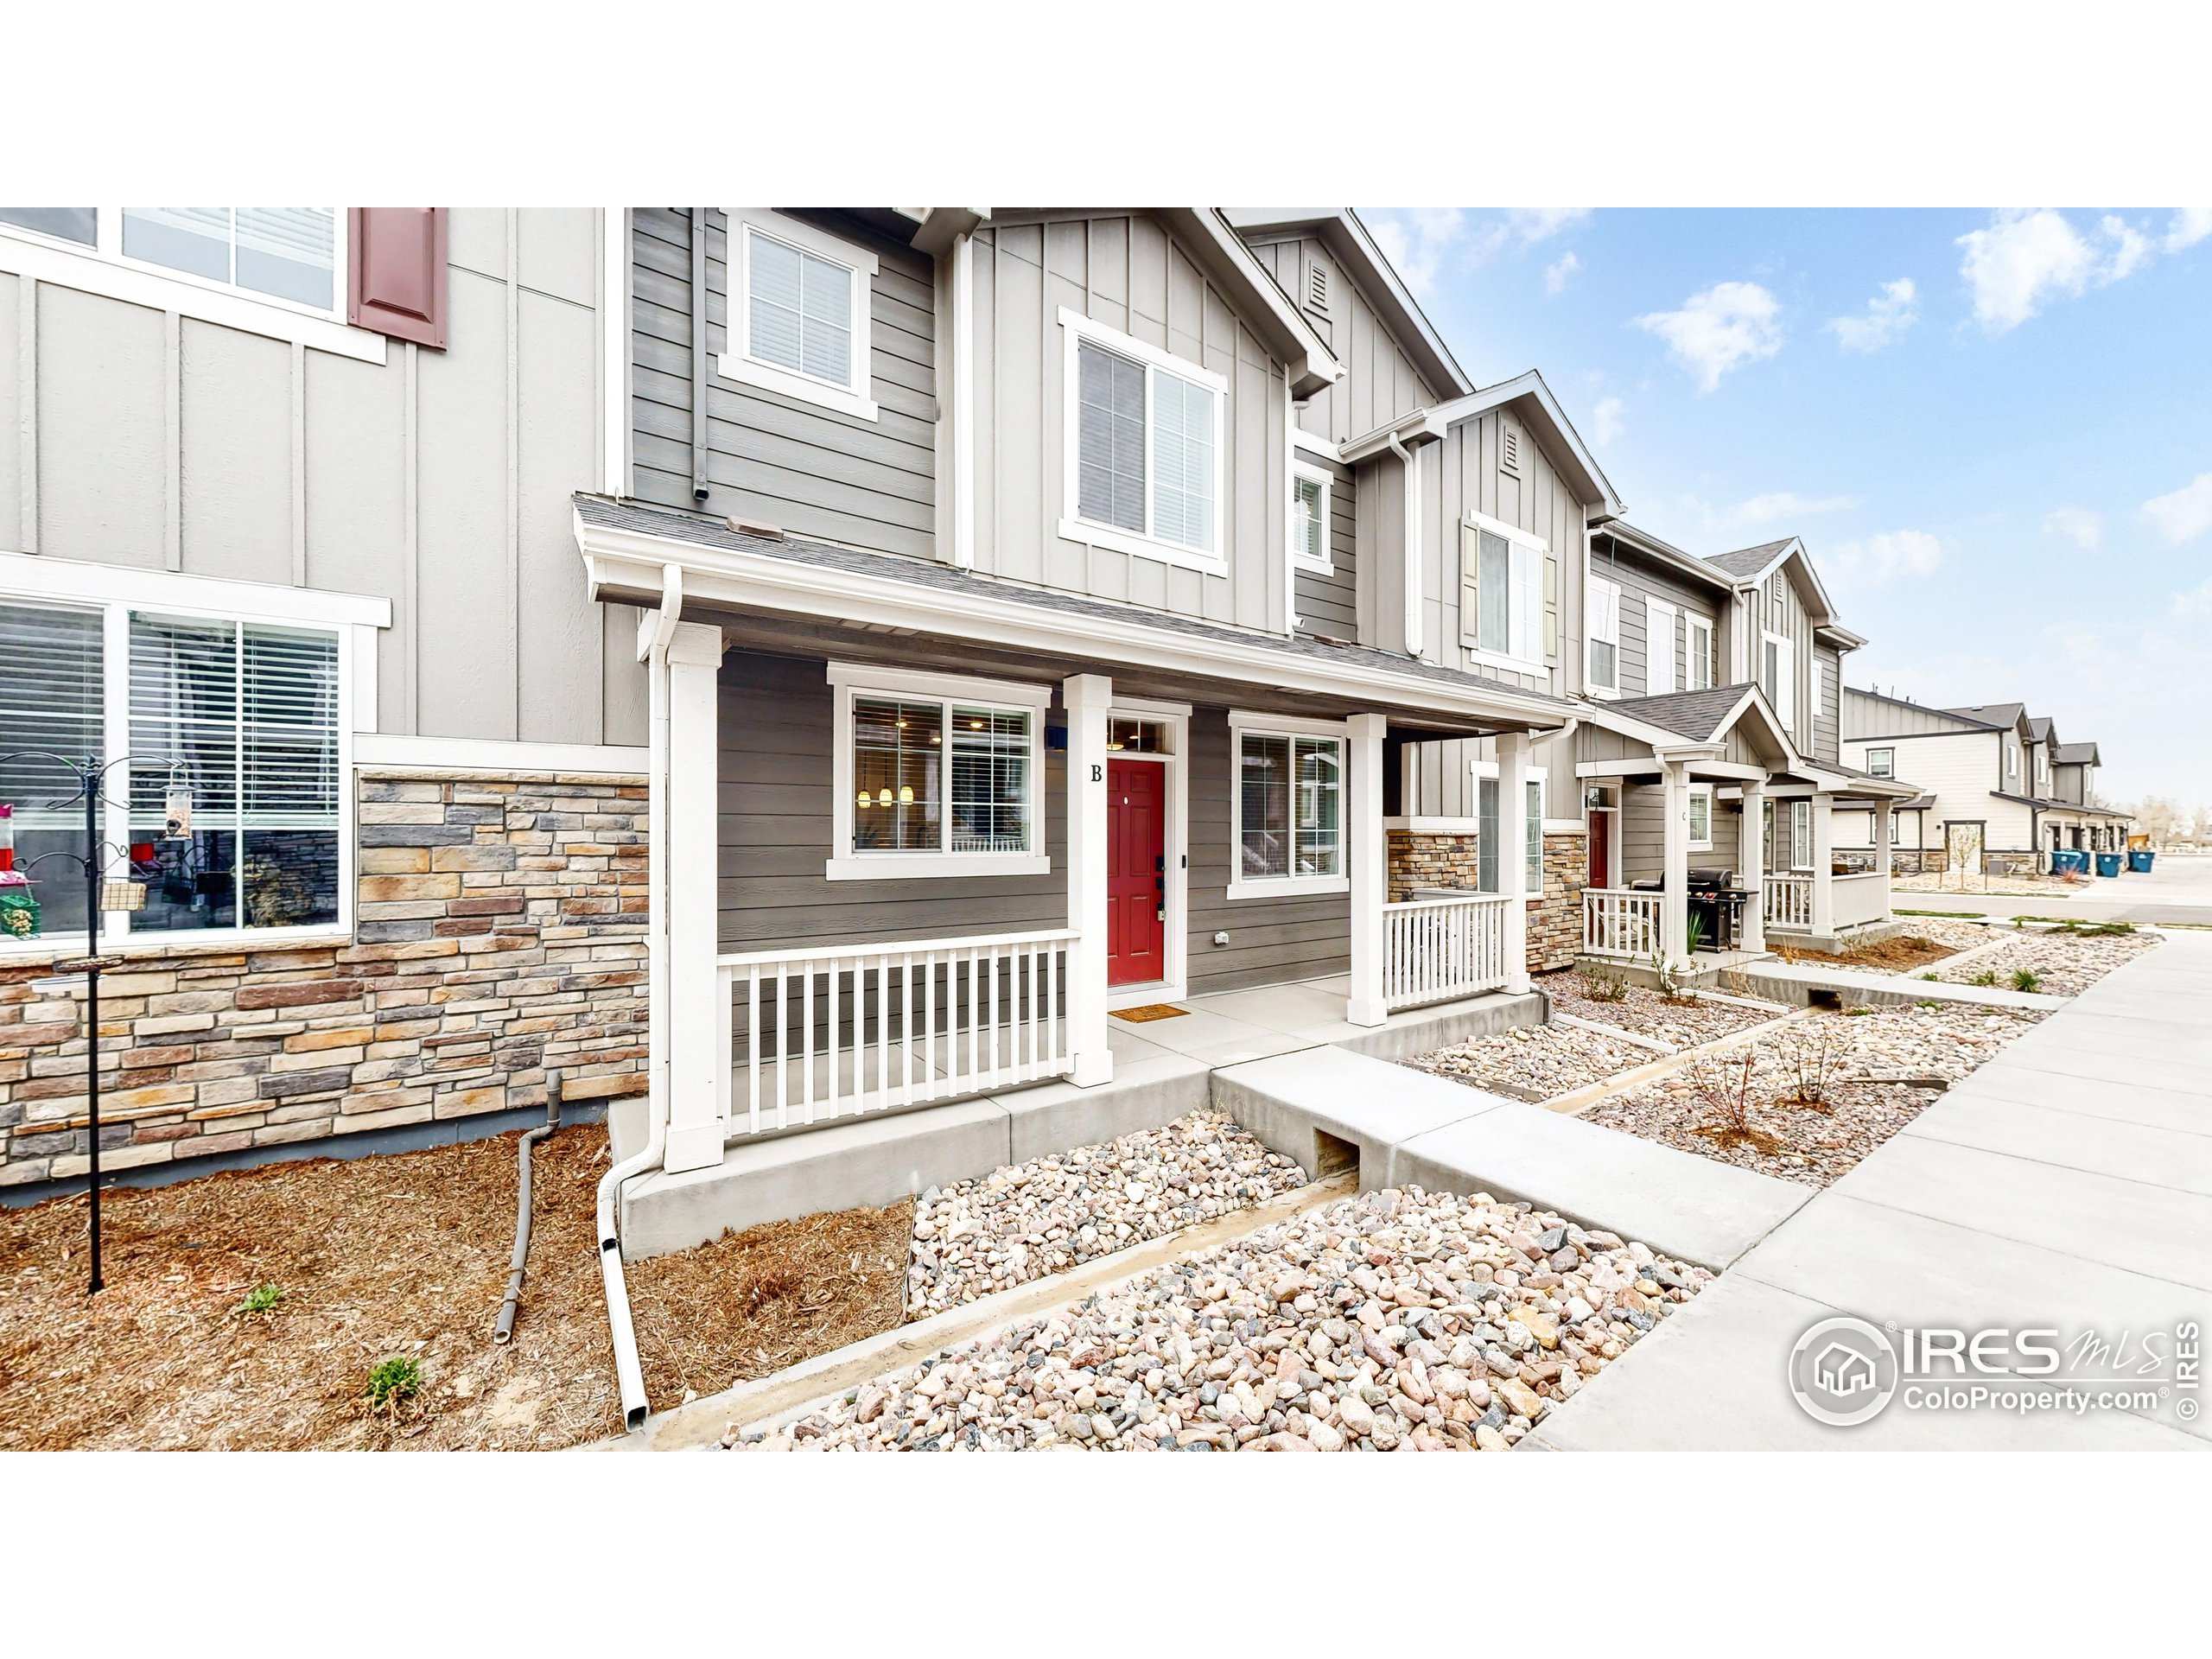 Condos for Sale in Commerce City CO